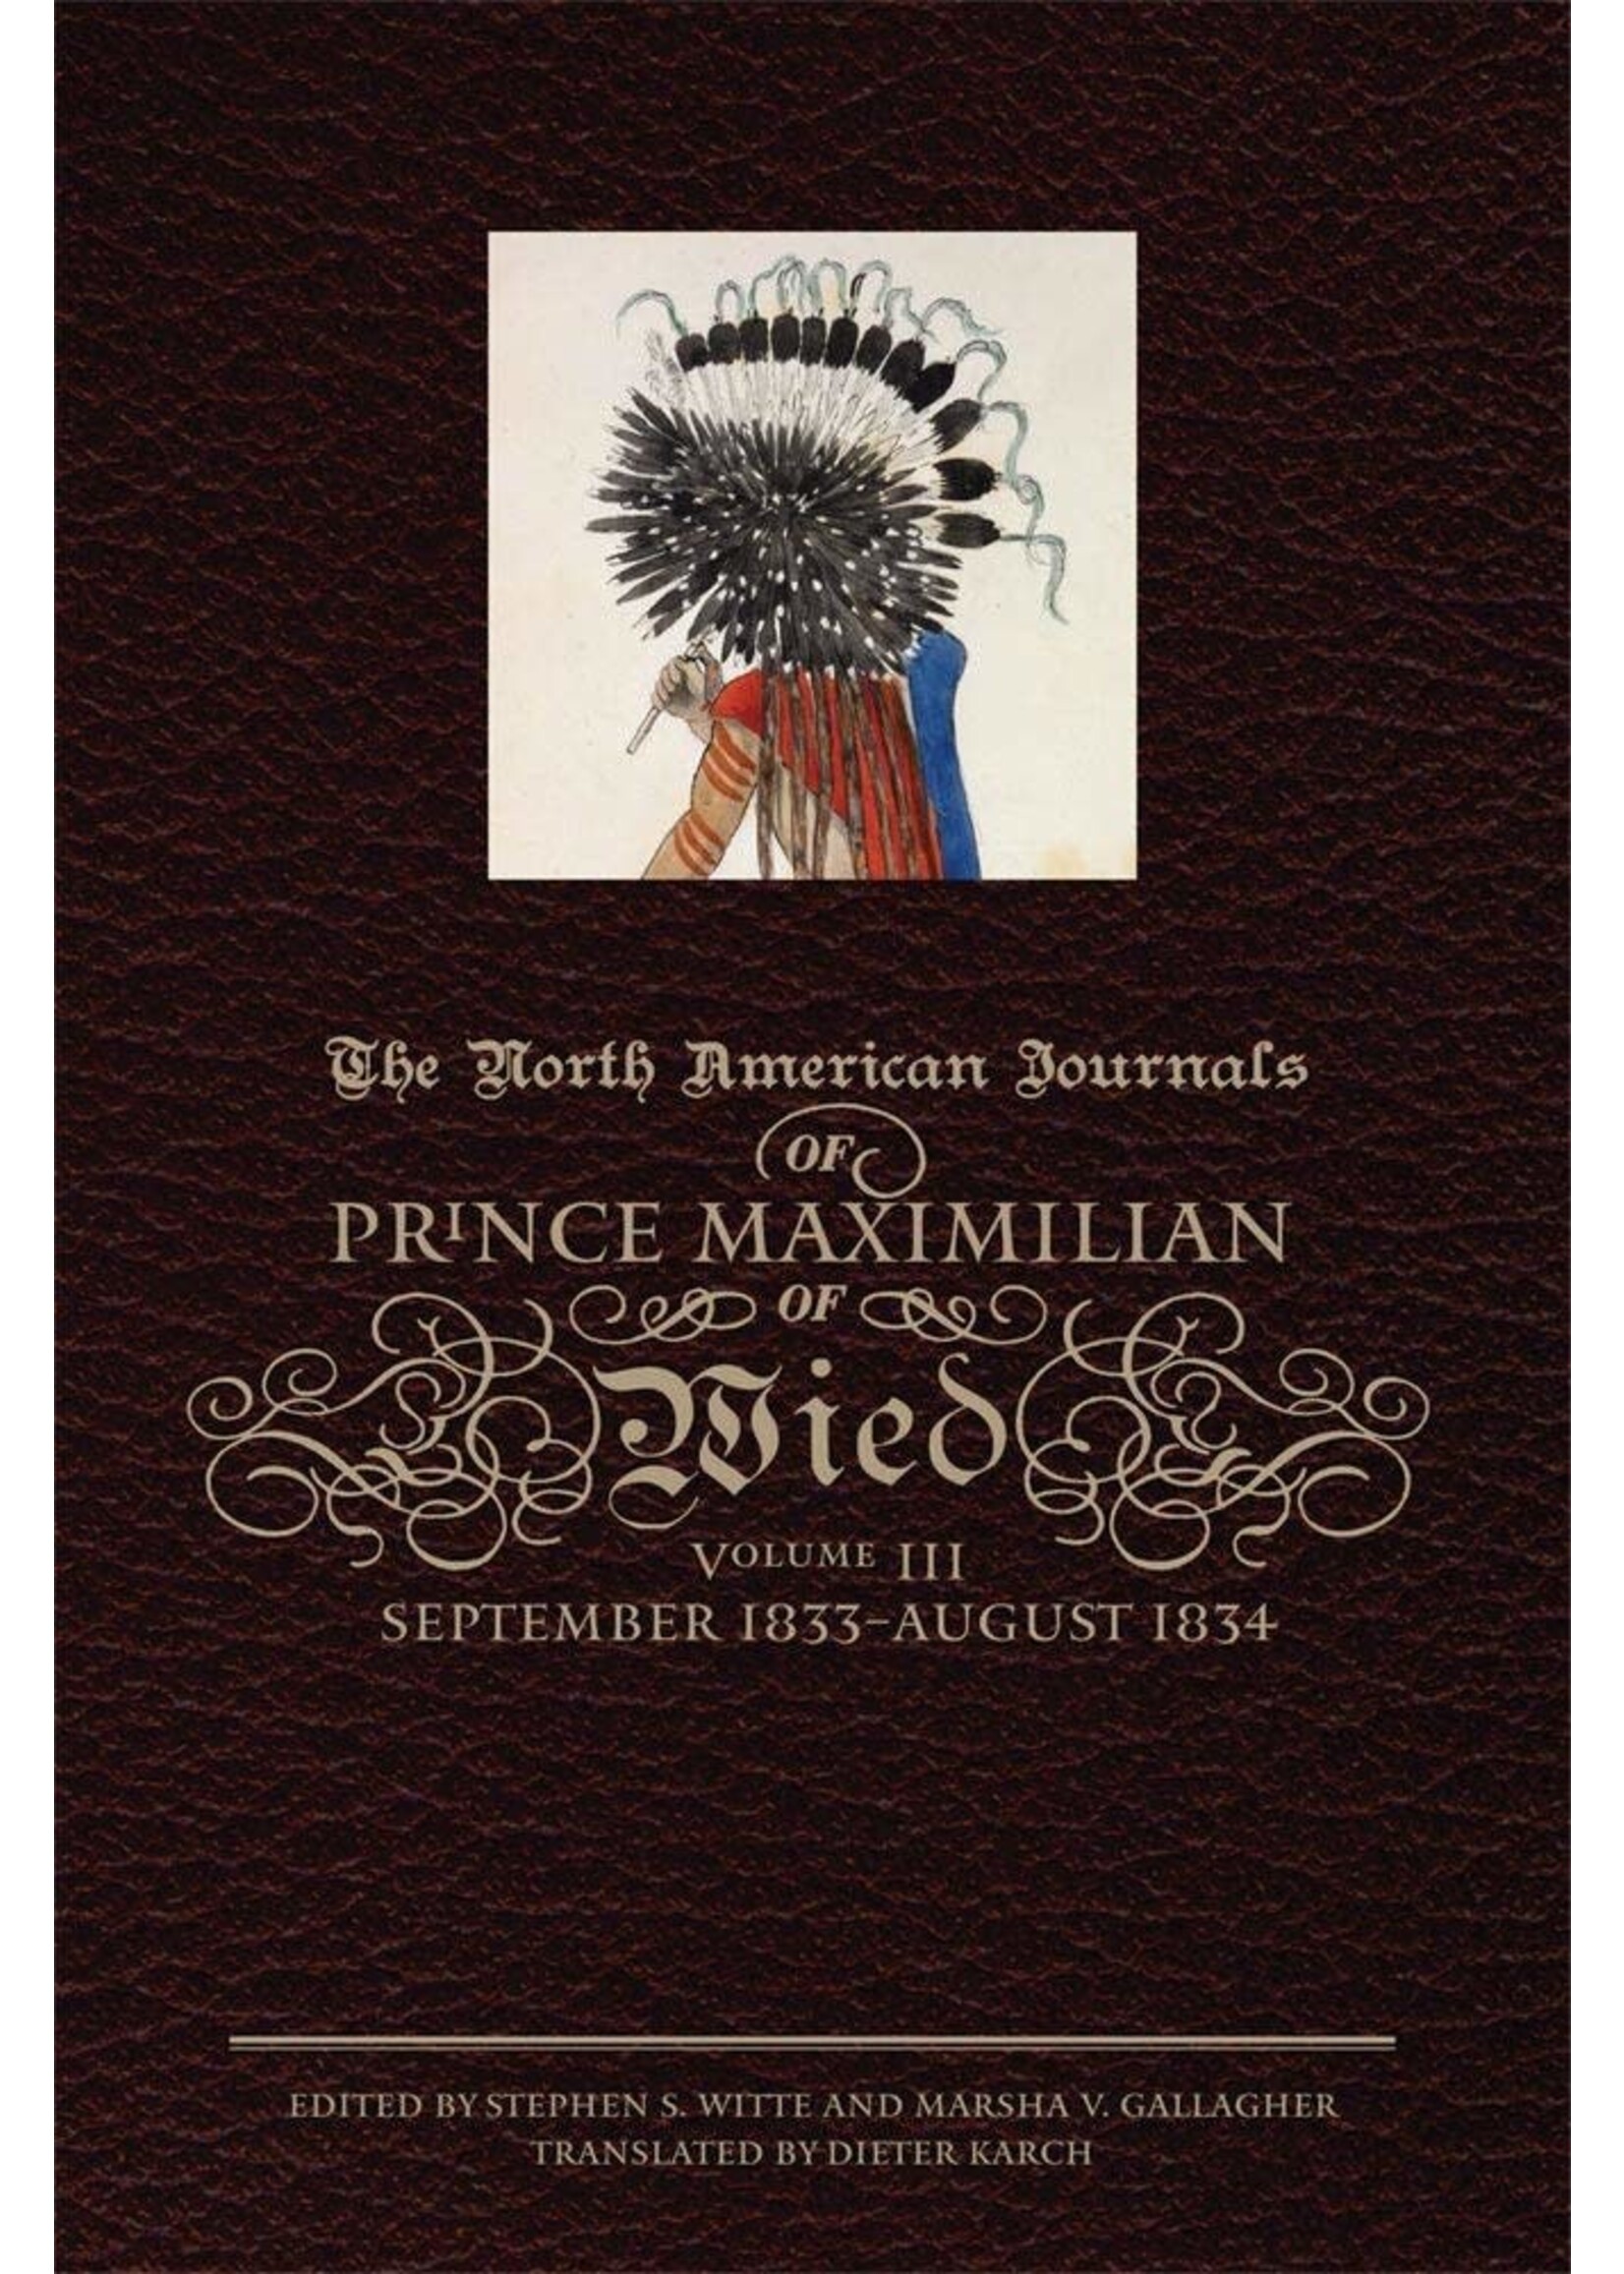 The North American Journals of Prince Maximilian of Wied: September 1833- August 1834 Volume 3